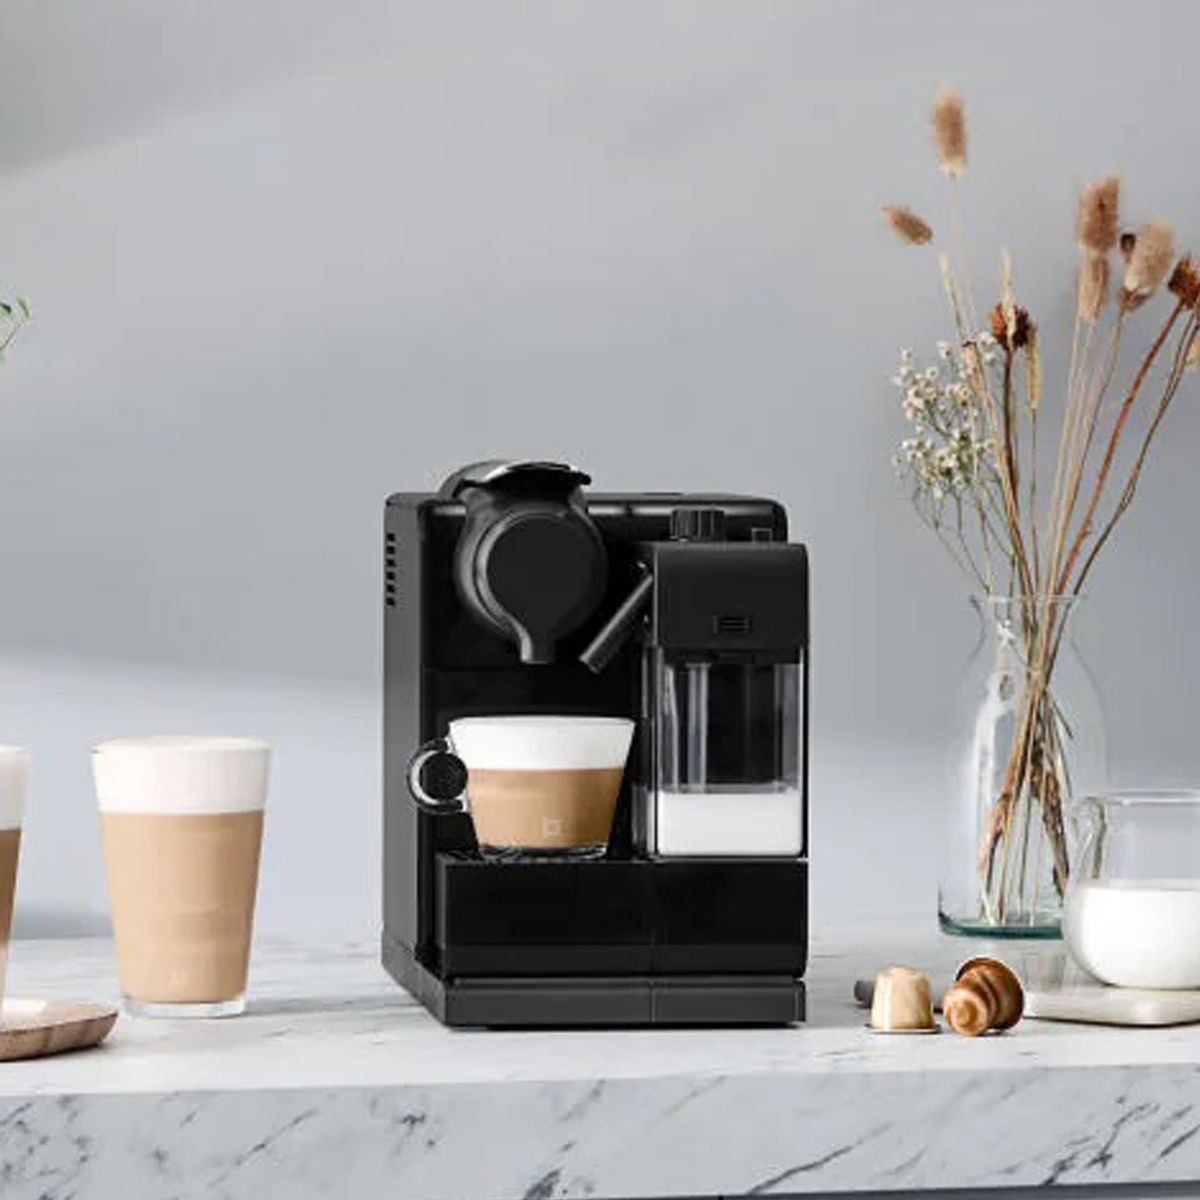 Want a way to make lattes at home? We tried the Nespresso Lattissima to see if it’s up to the job